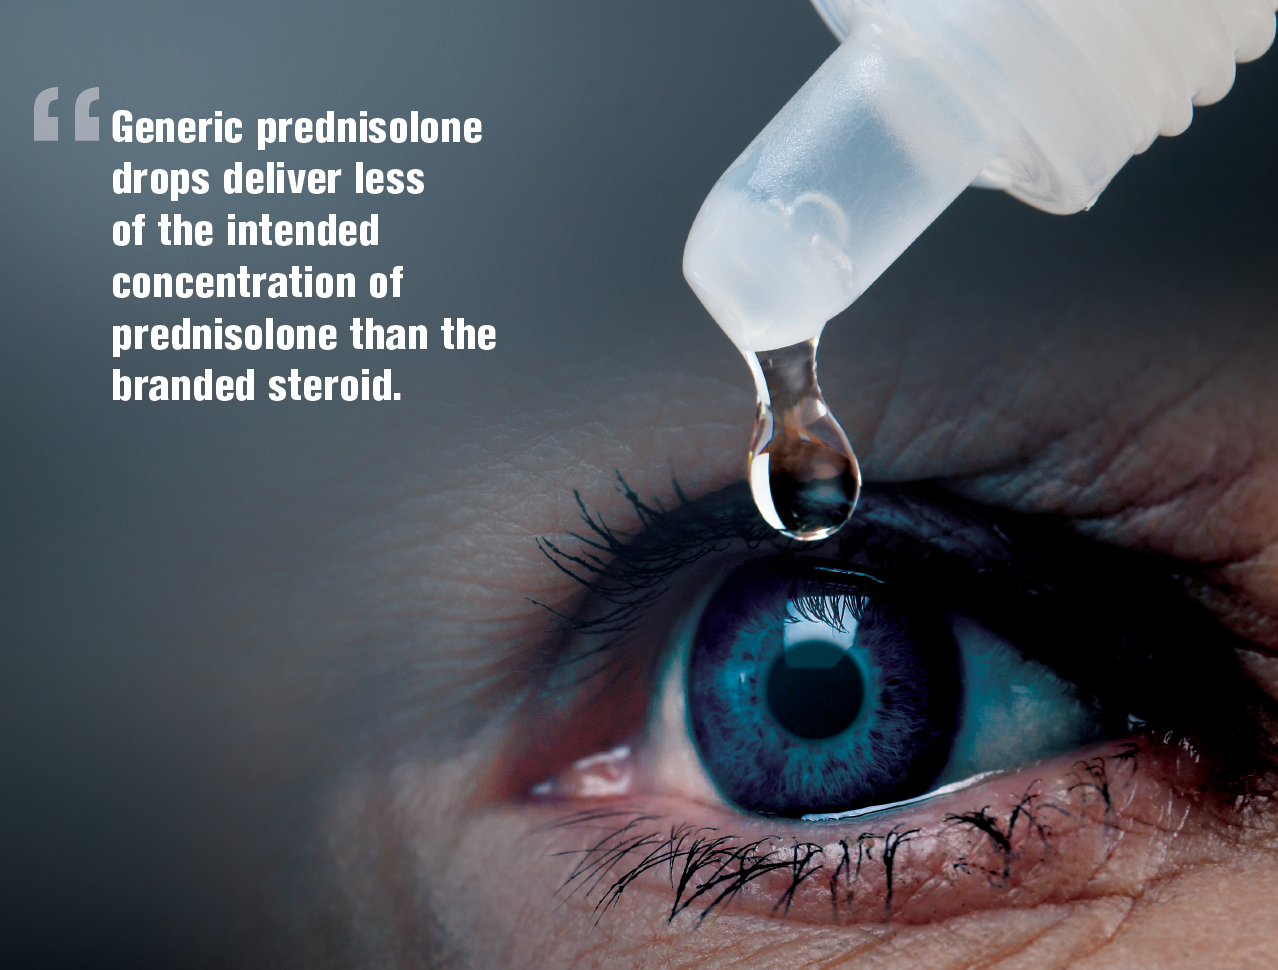 Know risks and benefits of ocular steroid use